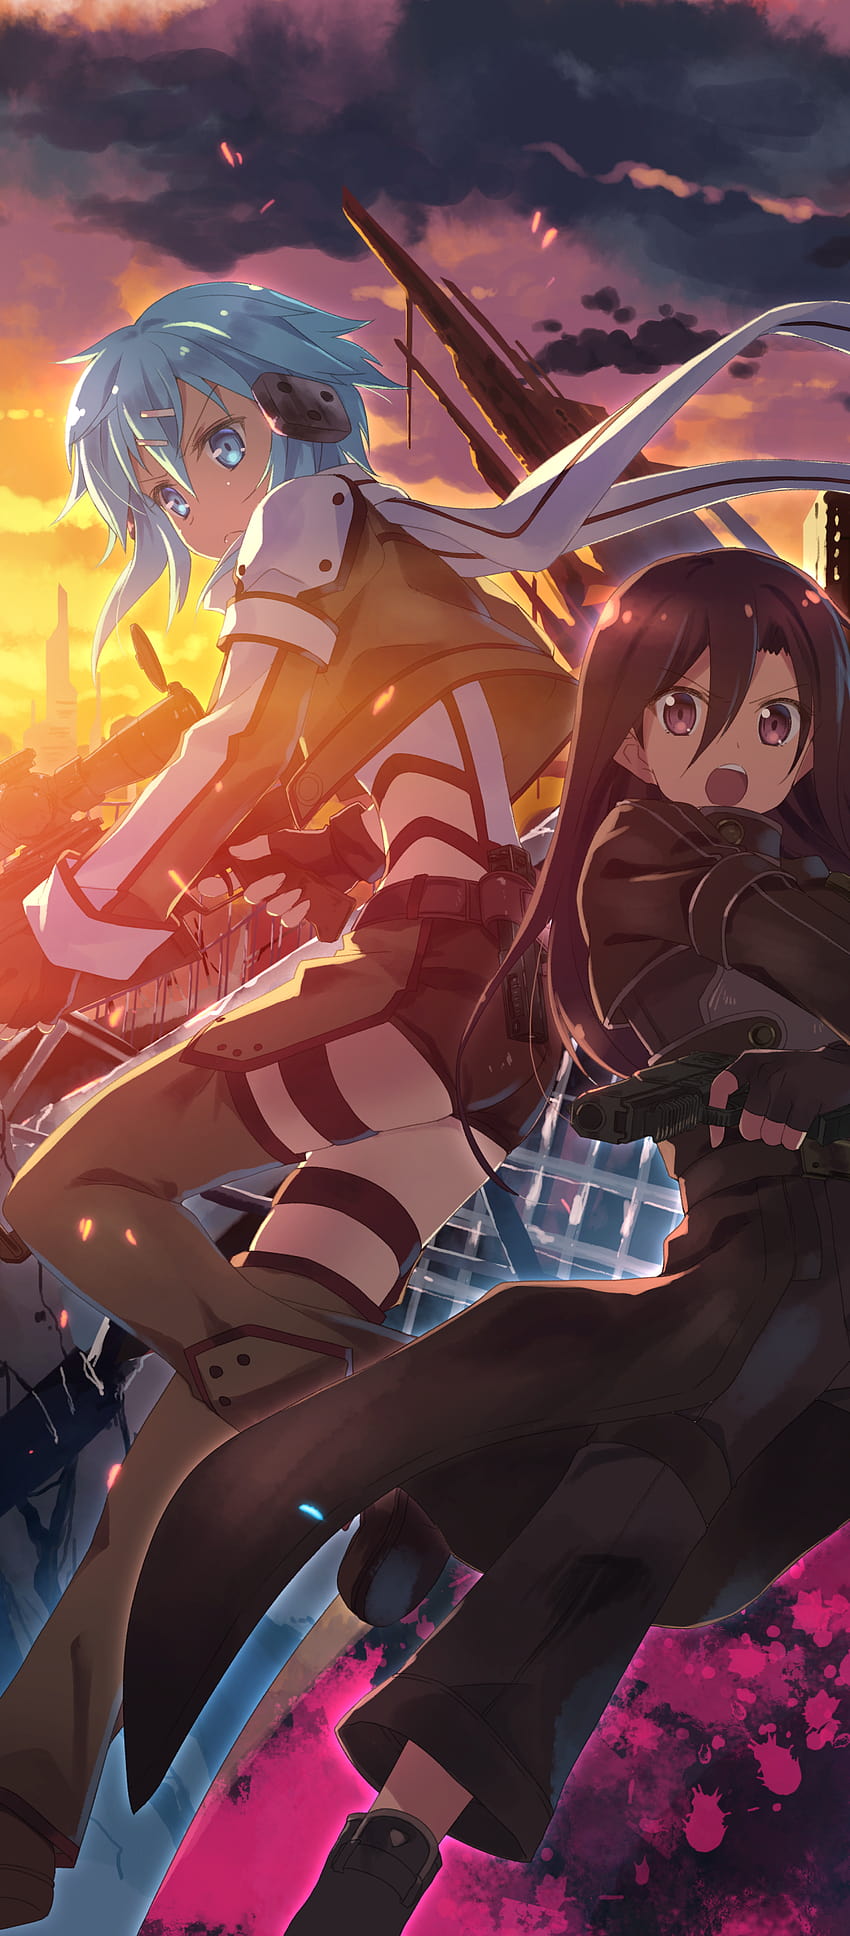 Check out These 11 Anime like Sword Art Online 2023